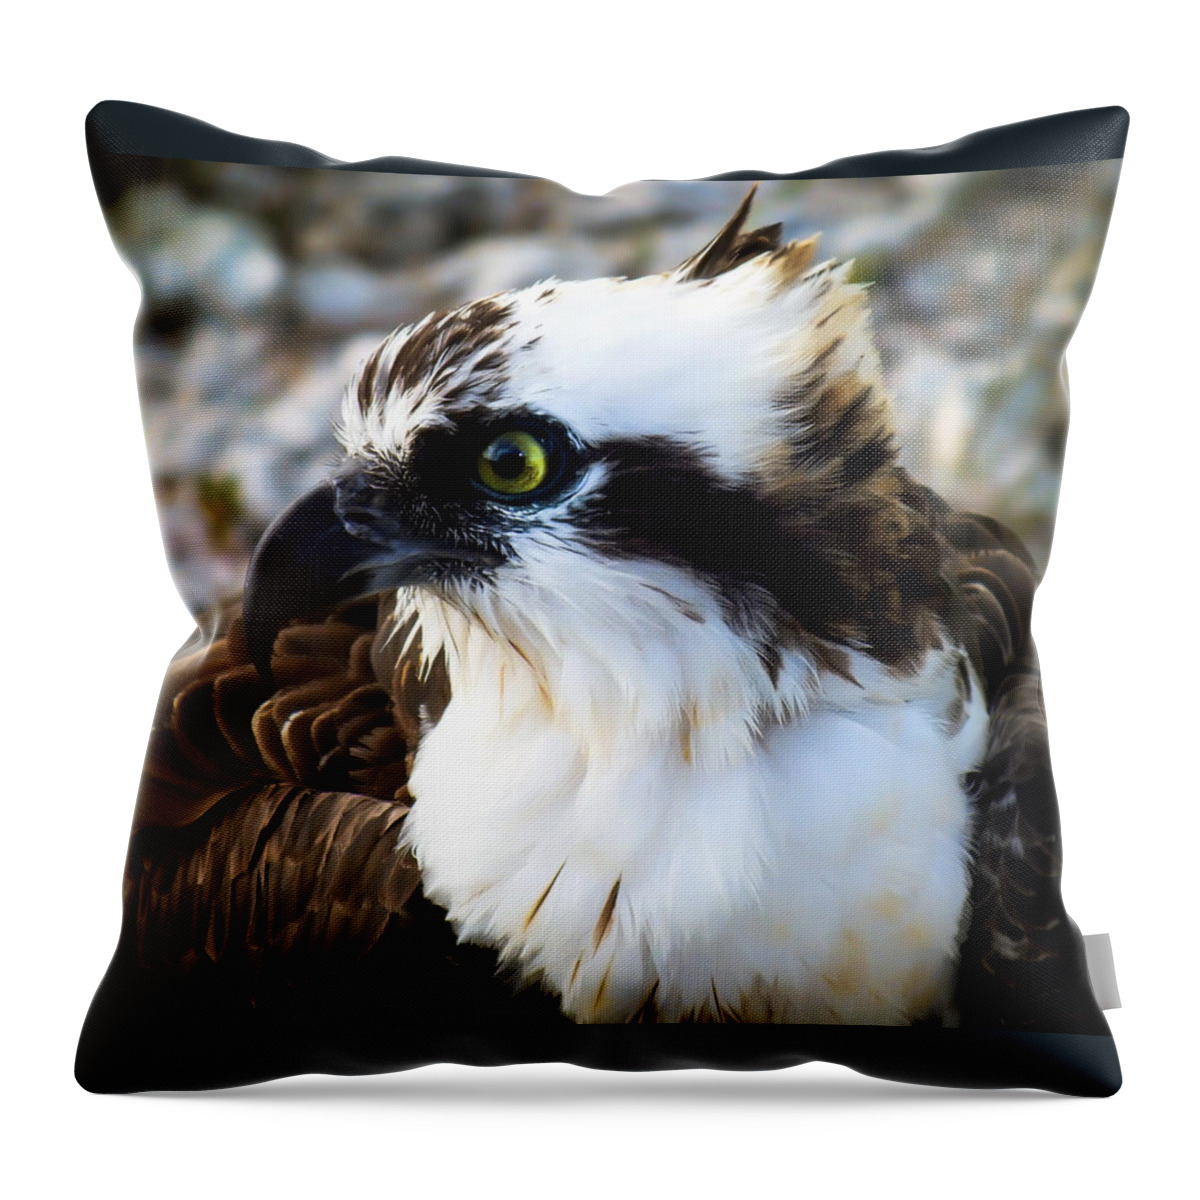 Birds Throw Pillow featuring the photograph Focused by Karen Wiles